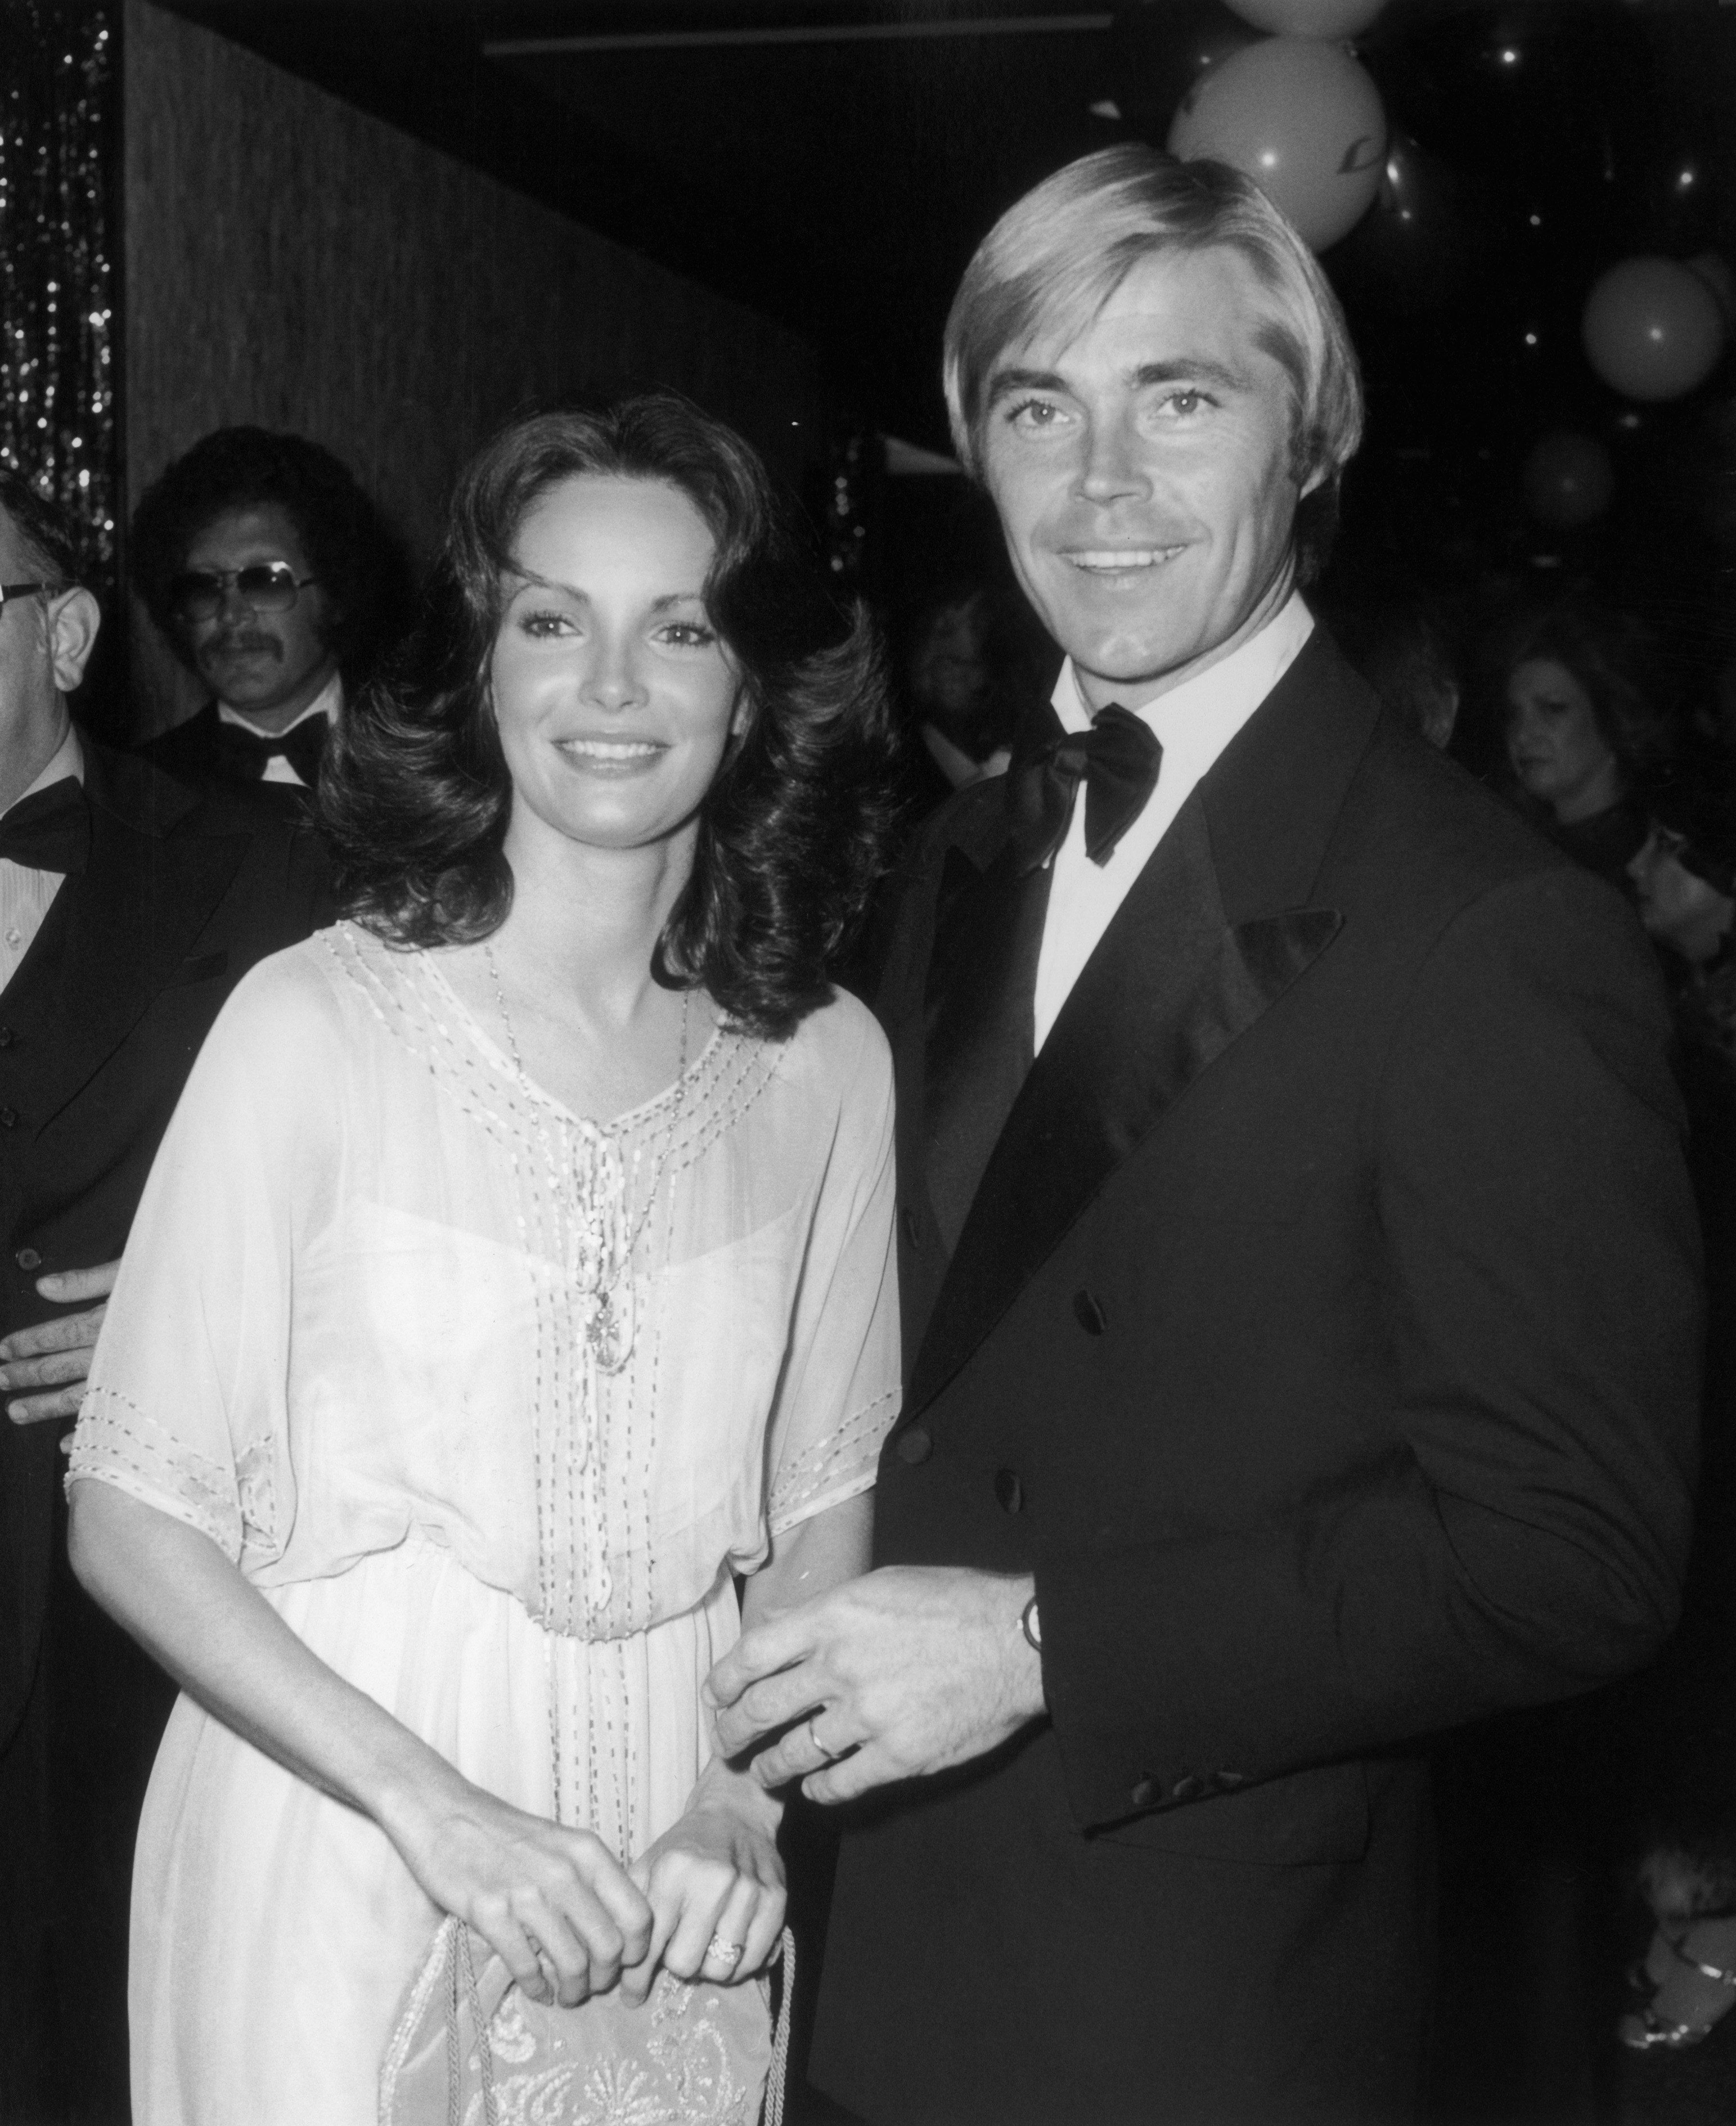 Jaclyn Smith and her new husband, actor Dennis Cole attend the 23rd Annual Thalians Ball at the Century Plaza Hotel in Century City, Los Angeles, 1978. Photo: Getty Images